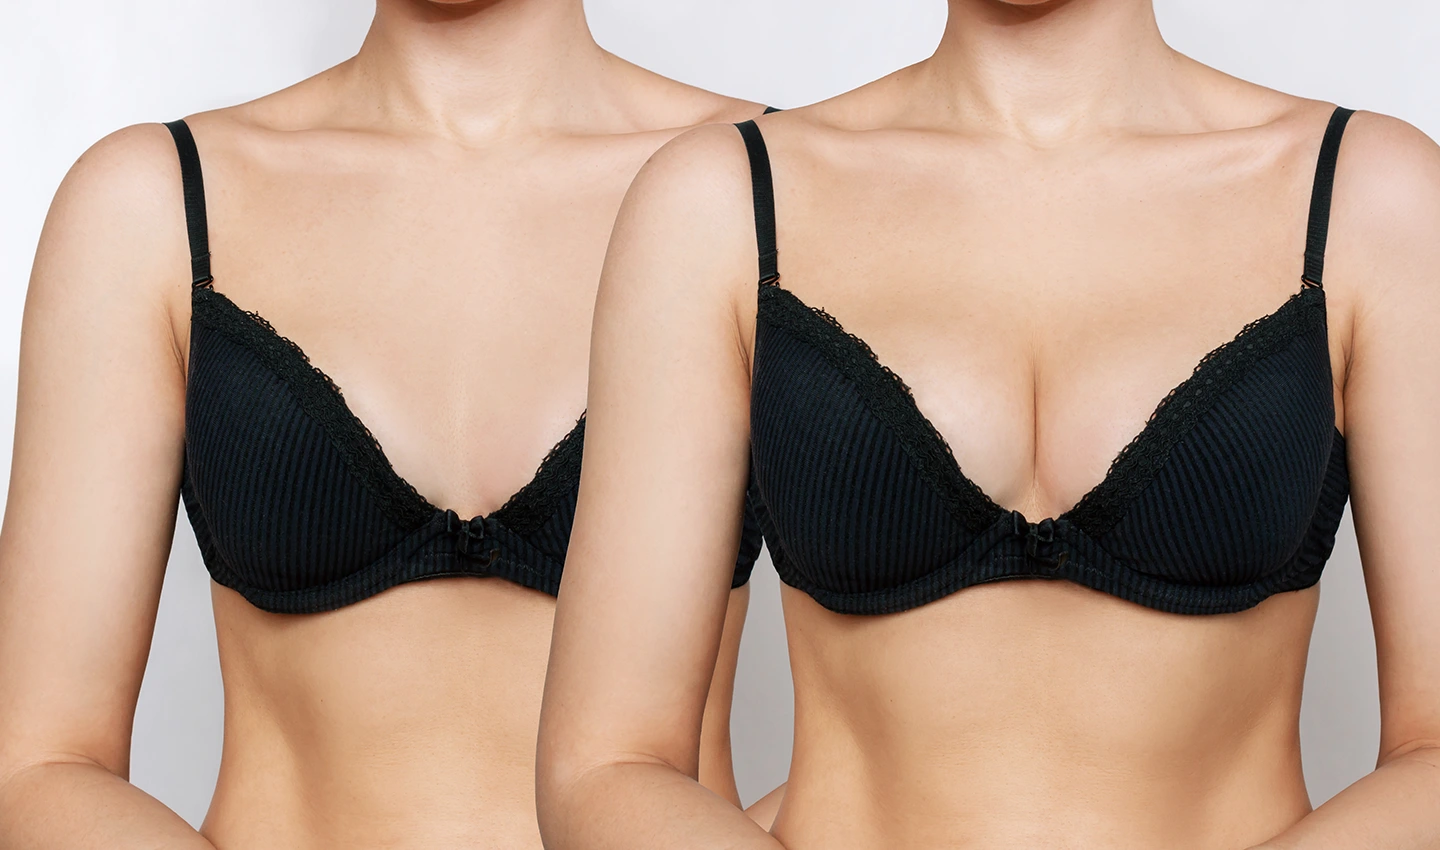 Before-and-after photos of a woman's breasts, illustrating the transformation that breast augmentation surgery can achieve.